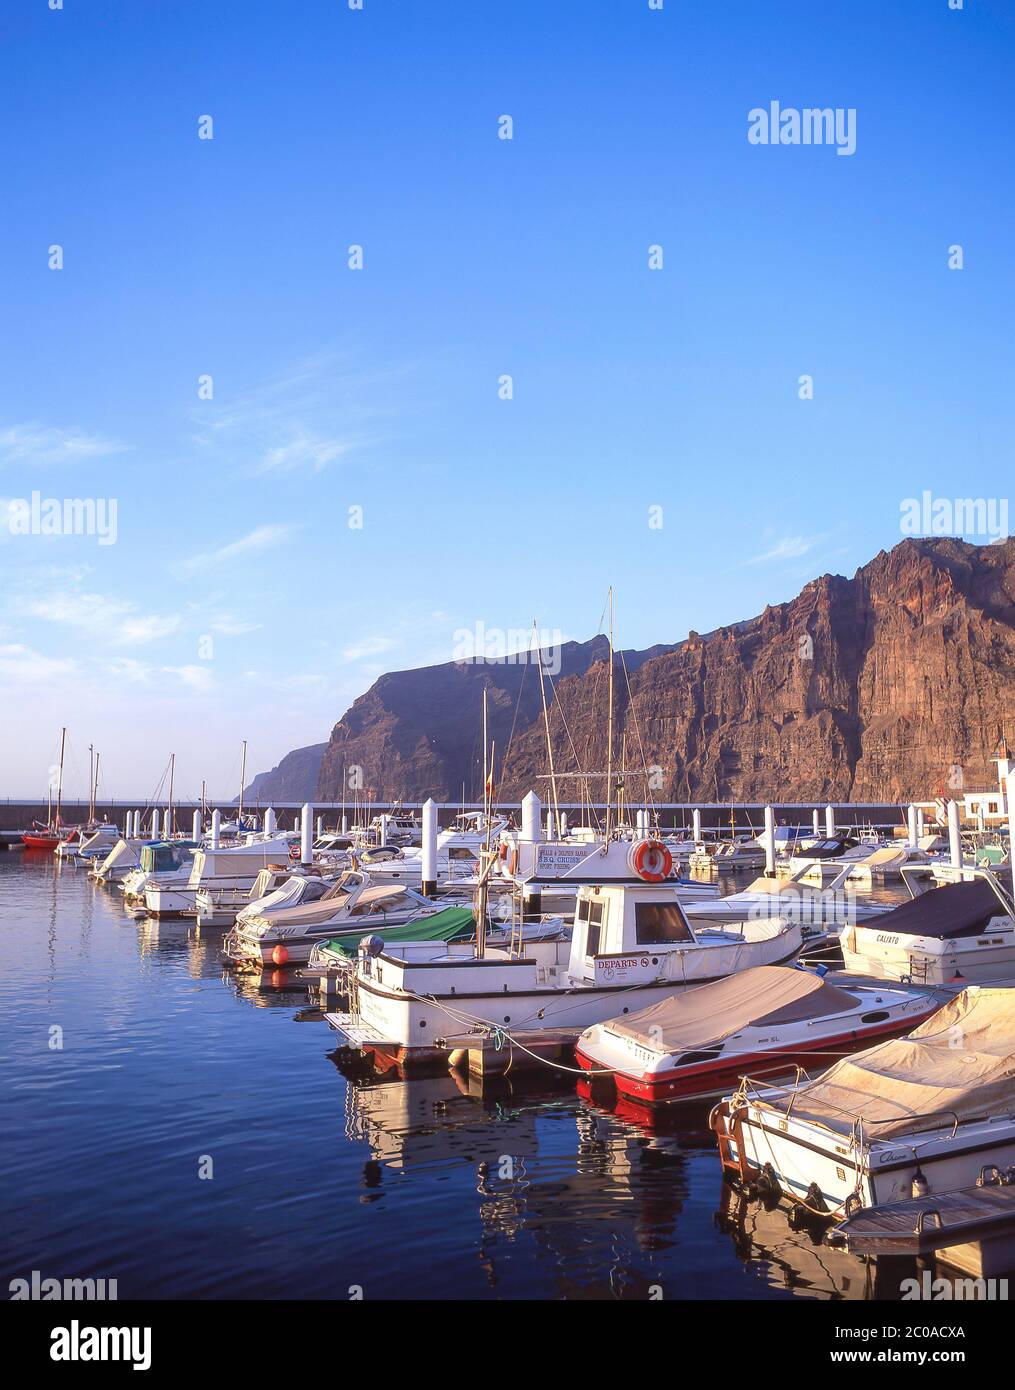 Fishing boats in harbour at sunrise, Los Gigantes, Tenerife, Canary Islands, Kingdom of Spain Stock Photo